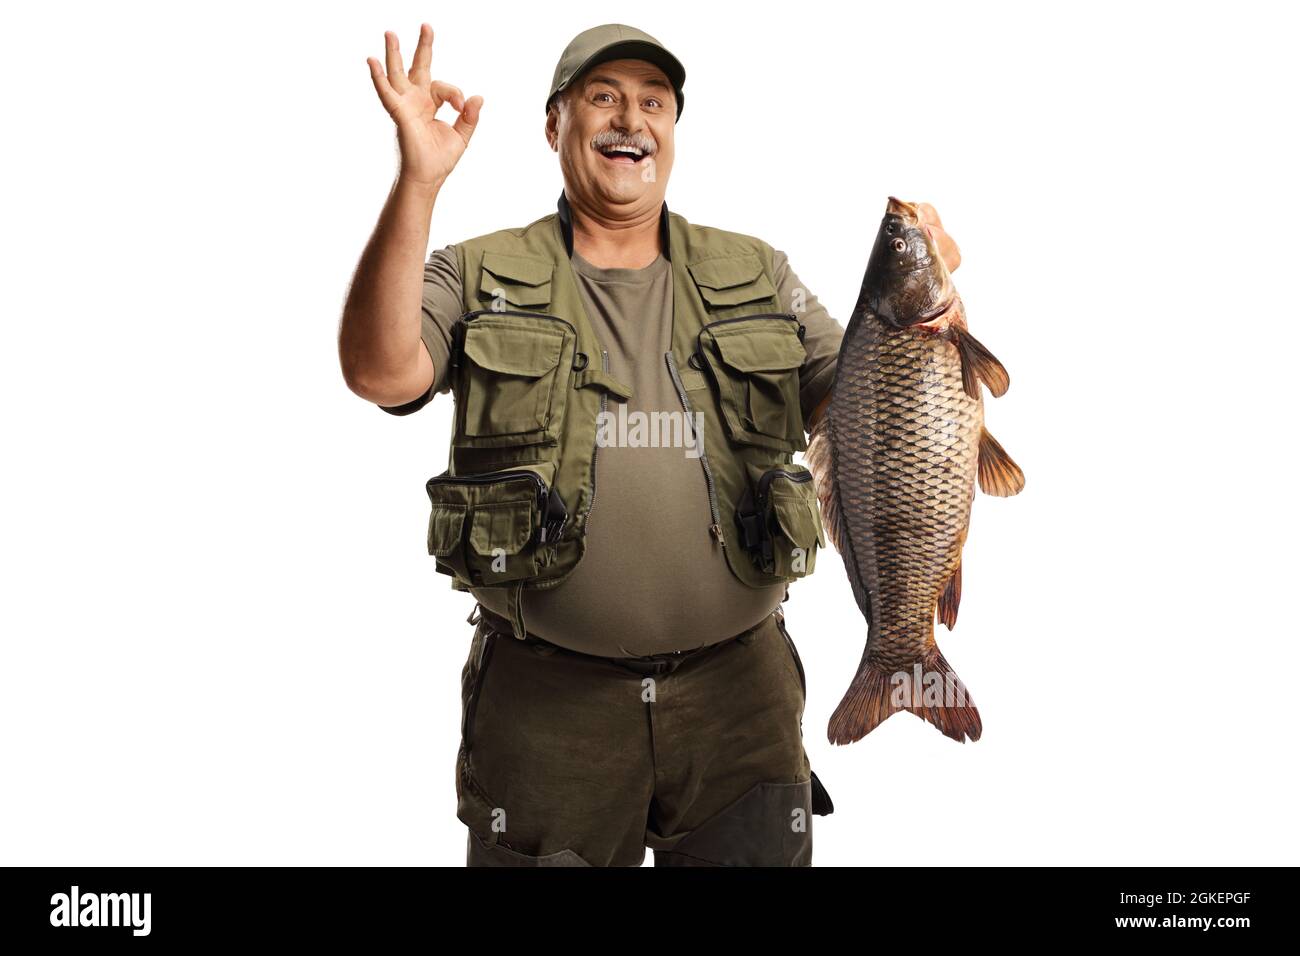 Fish people Cut Out Stock Images & Pictures - Page 2 - Alamy